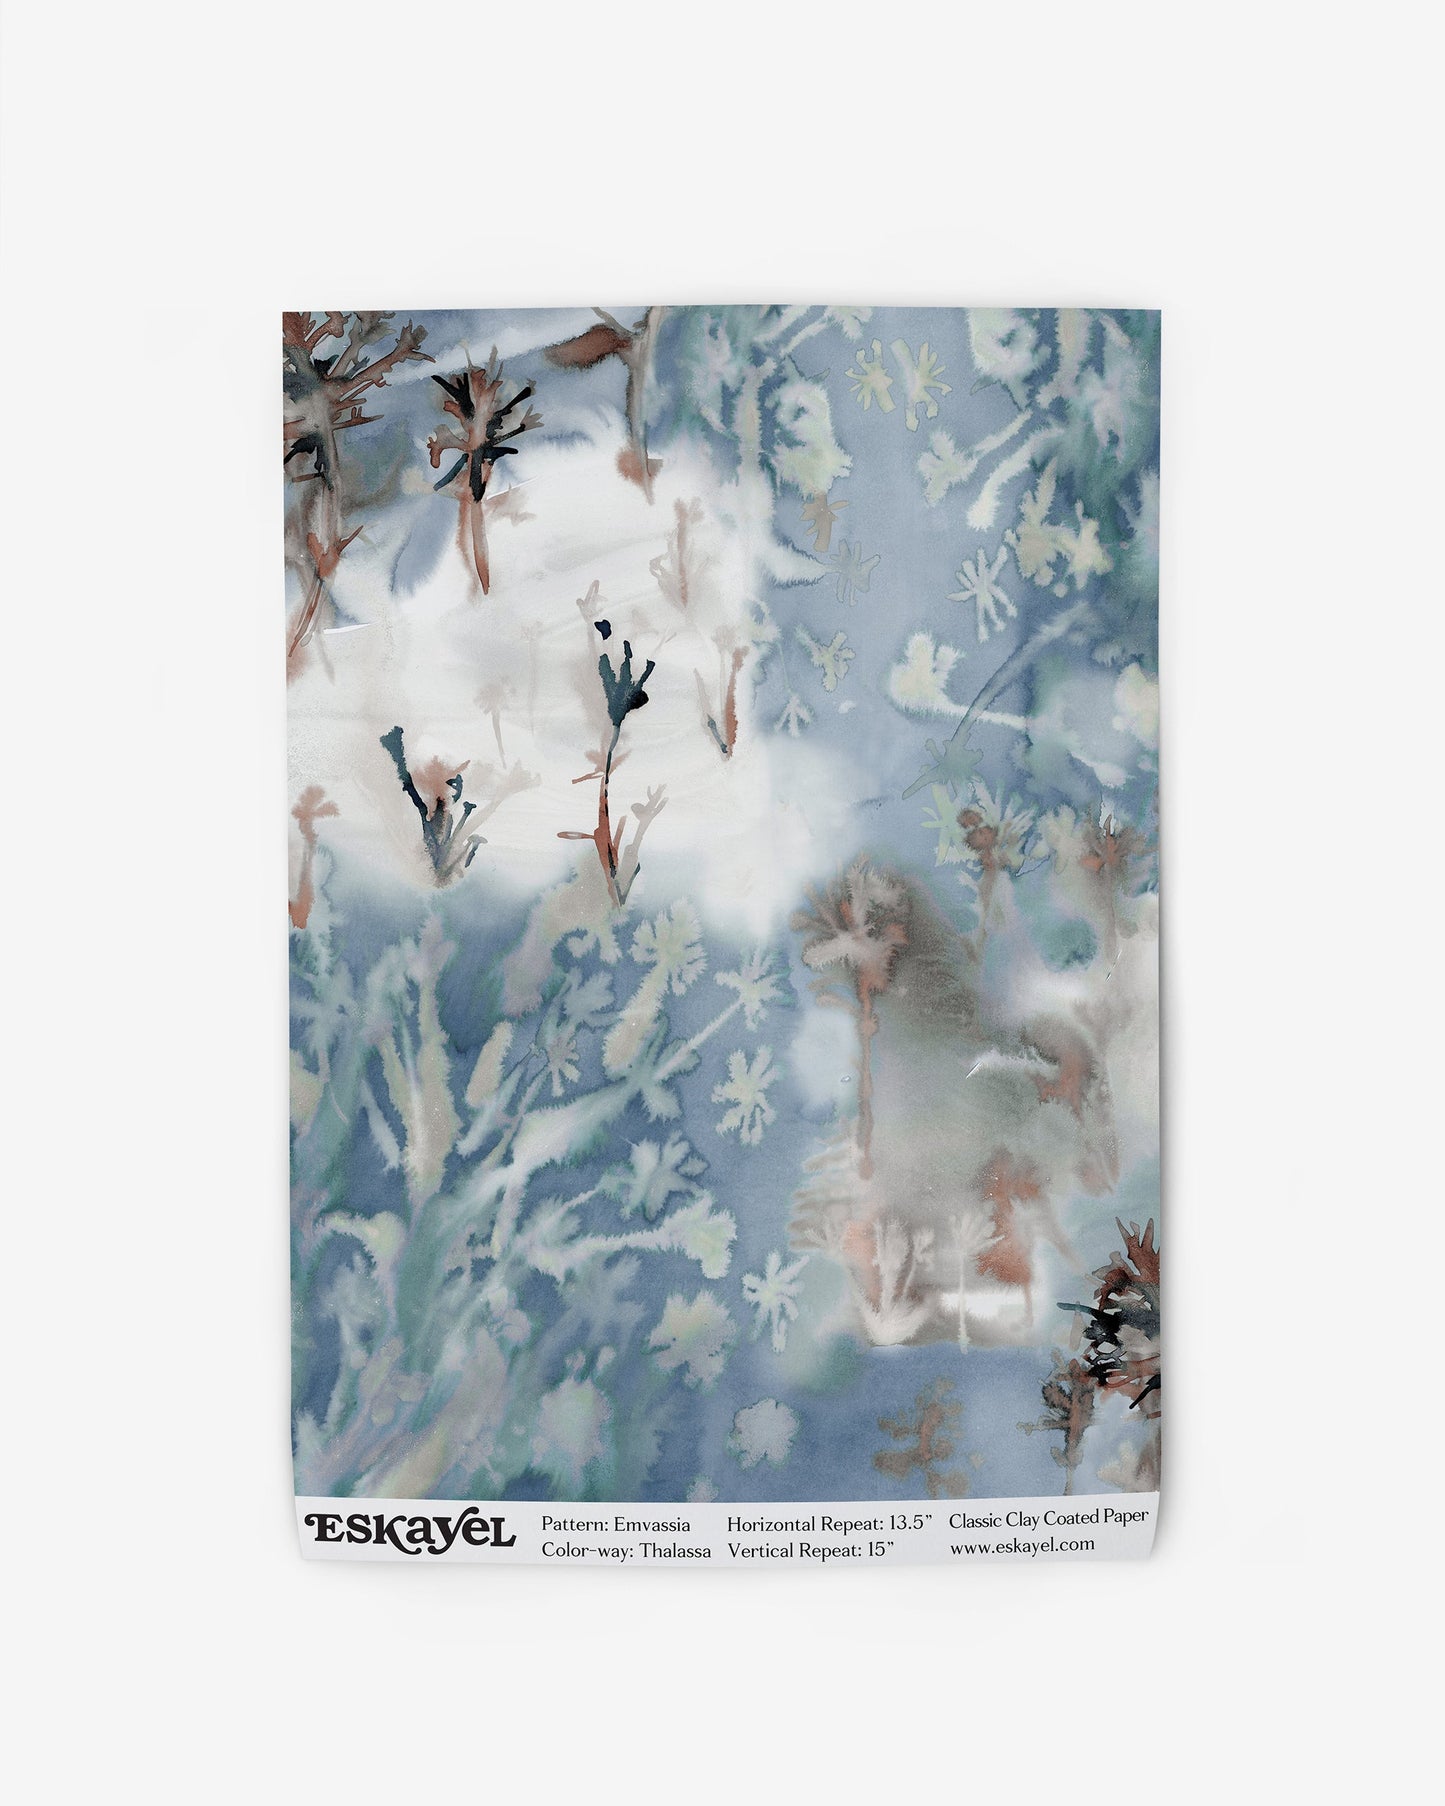 A blue Emvasia Wallpaper with flowers and trees on it